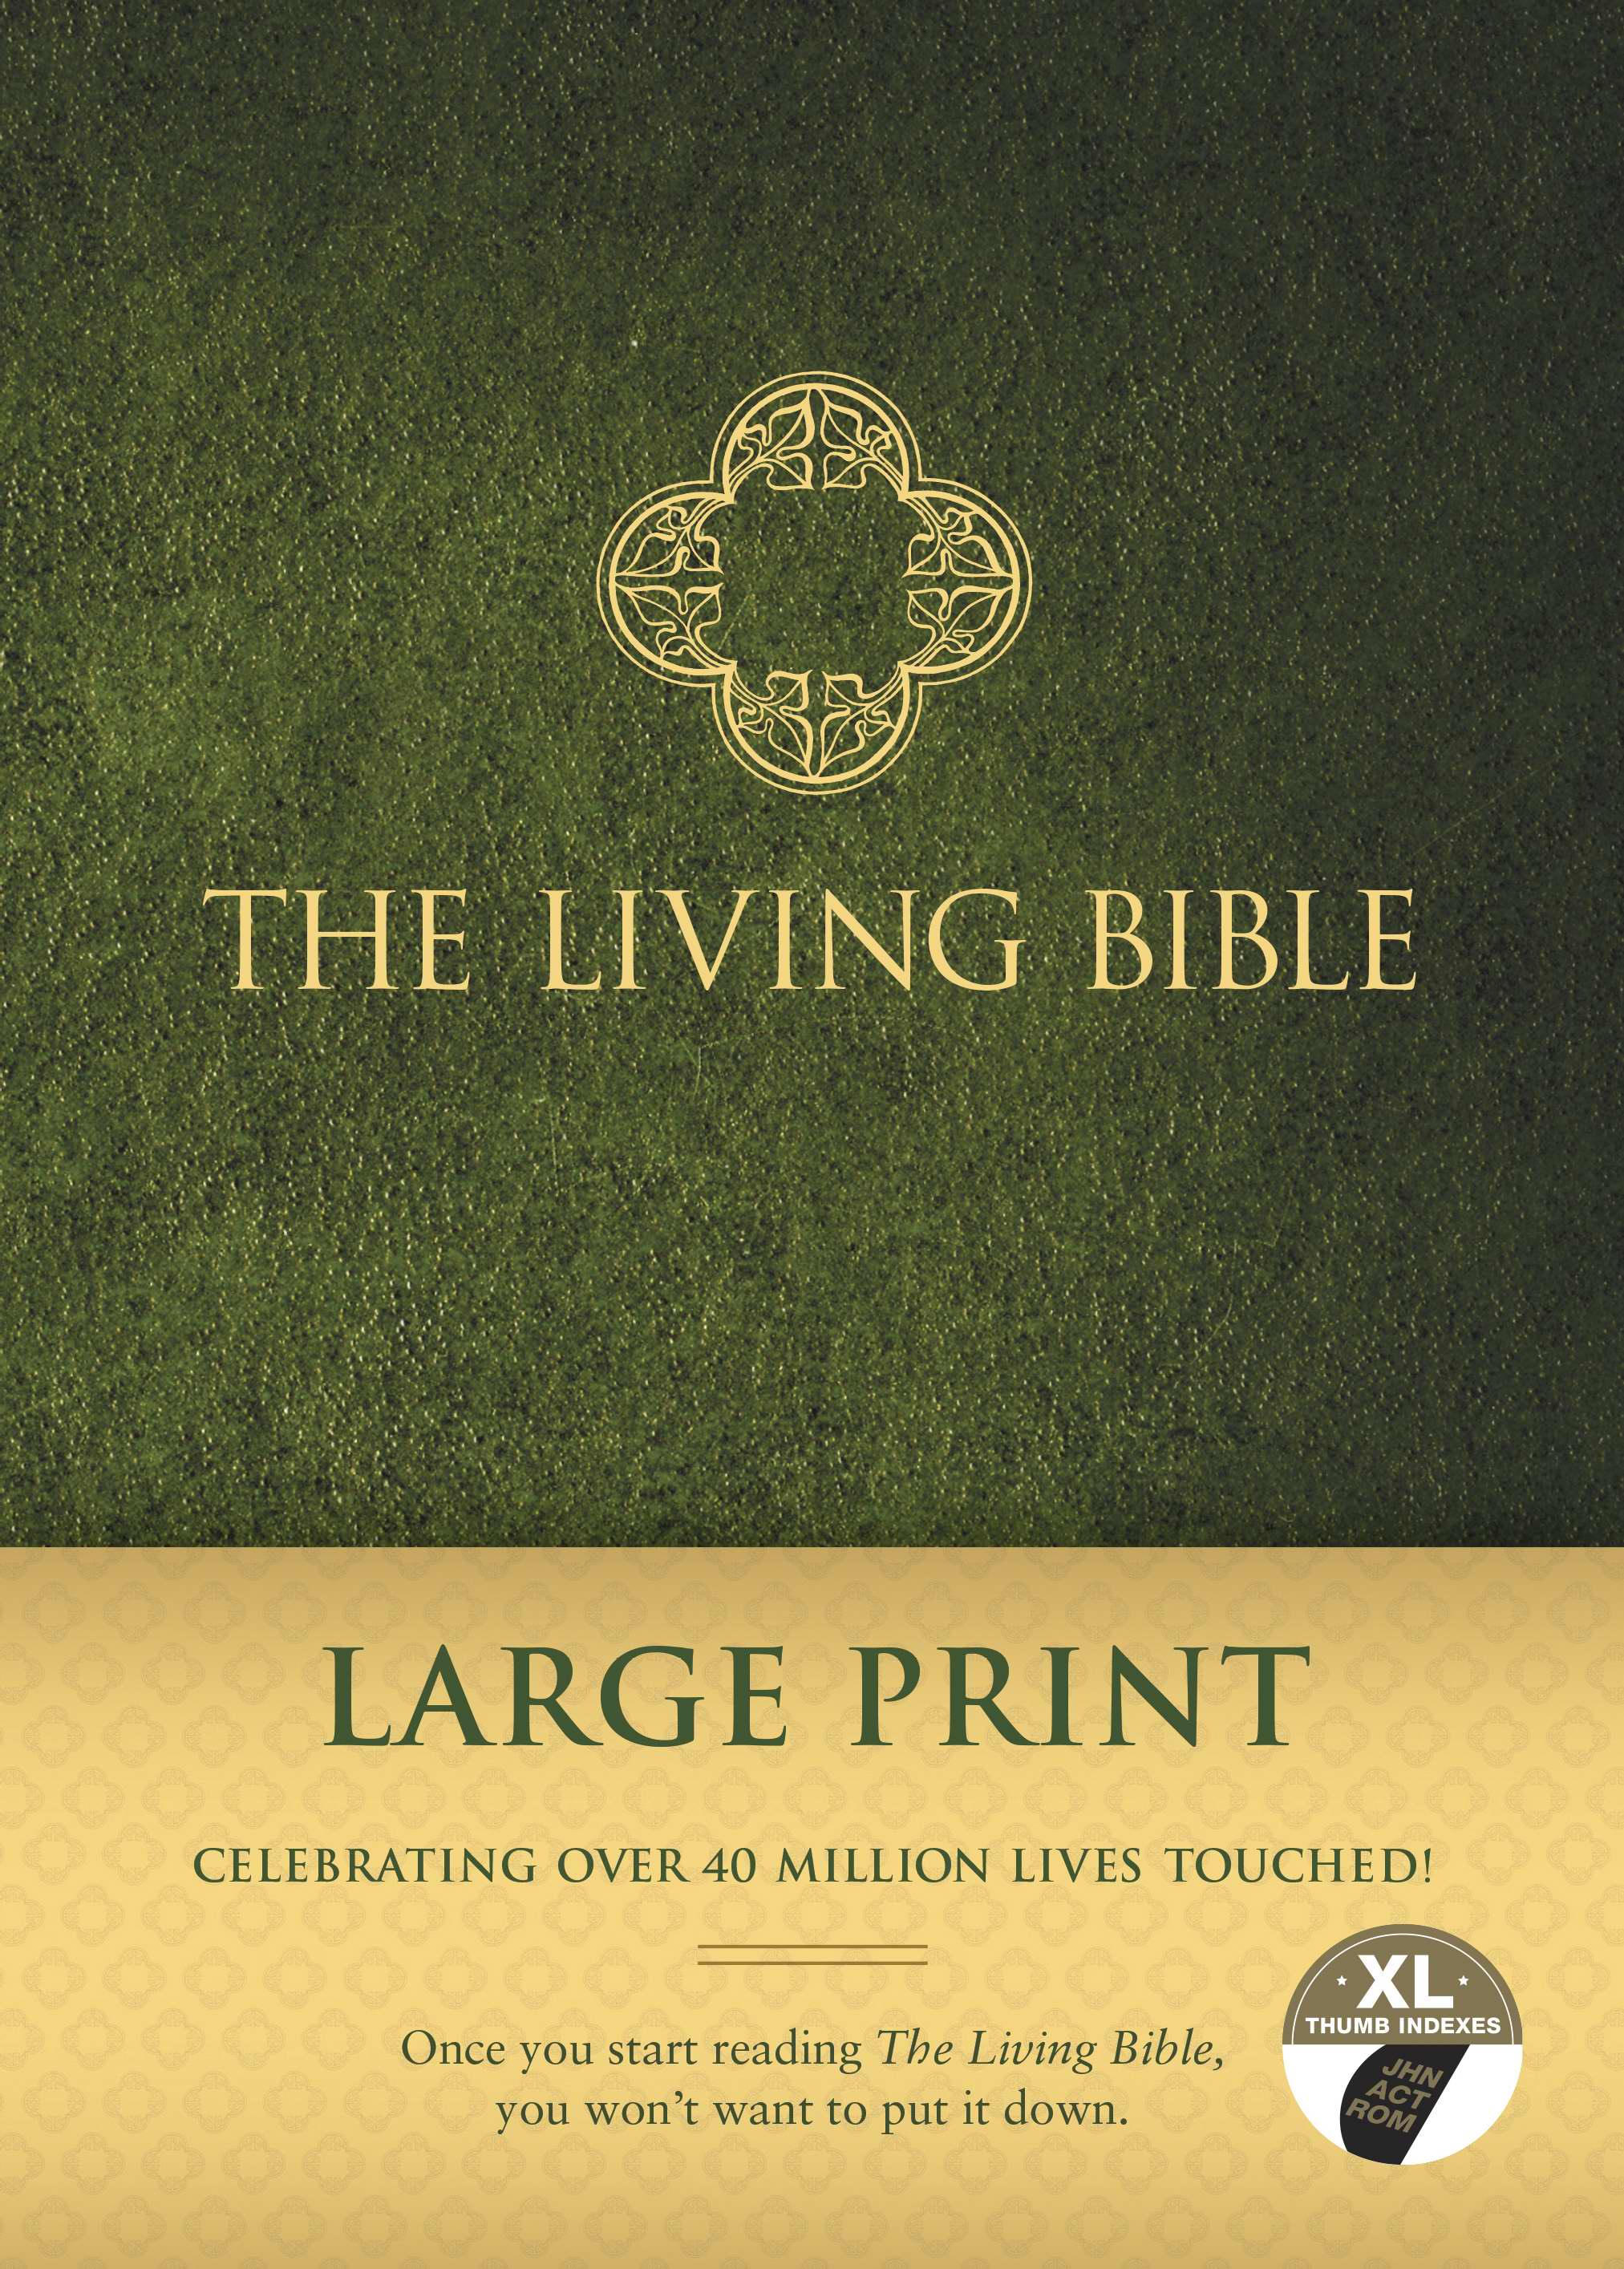 Image of The Living Bible Large Print Edition other